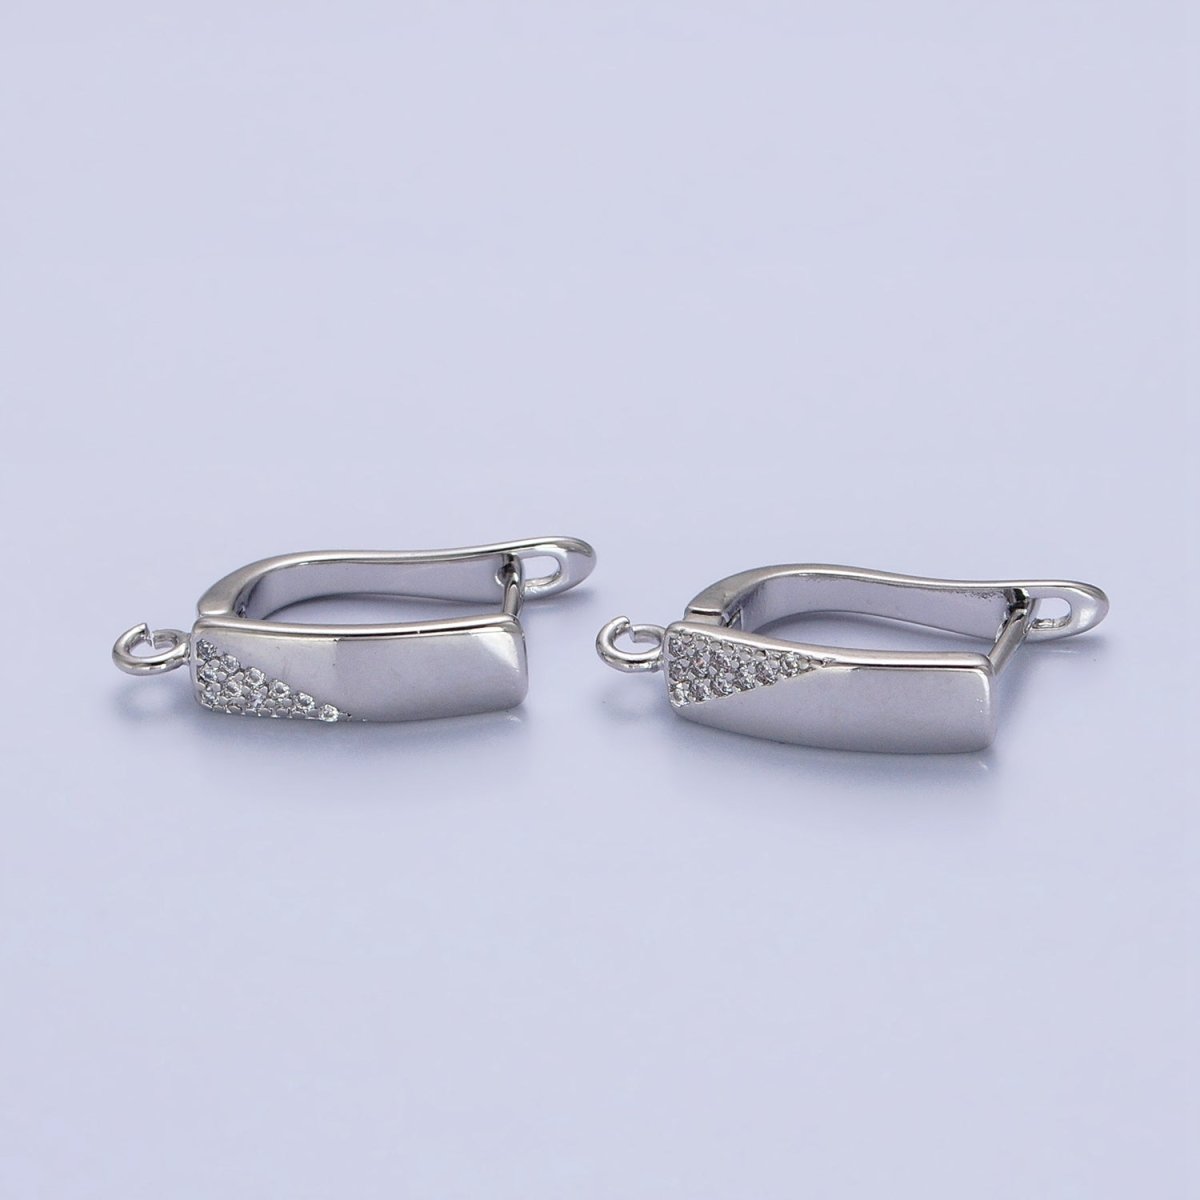 Silver Triangle Micro Paved Long Bar Open Loop English Lock Earrings Supply | Z-199 - DLUXCA